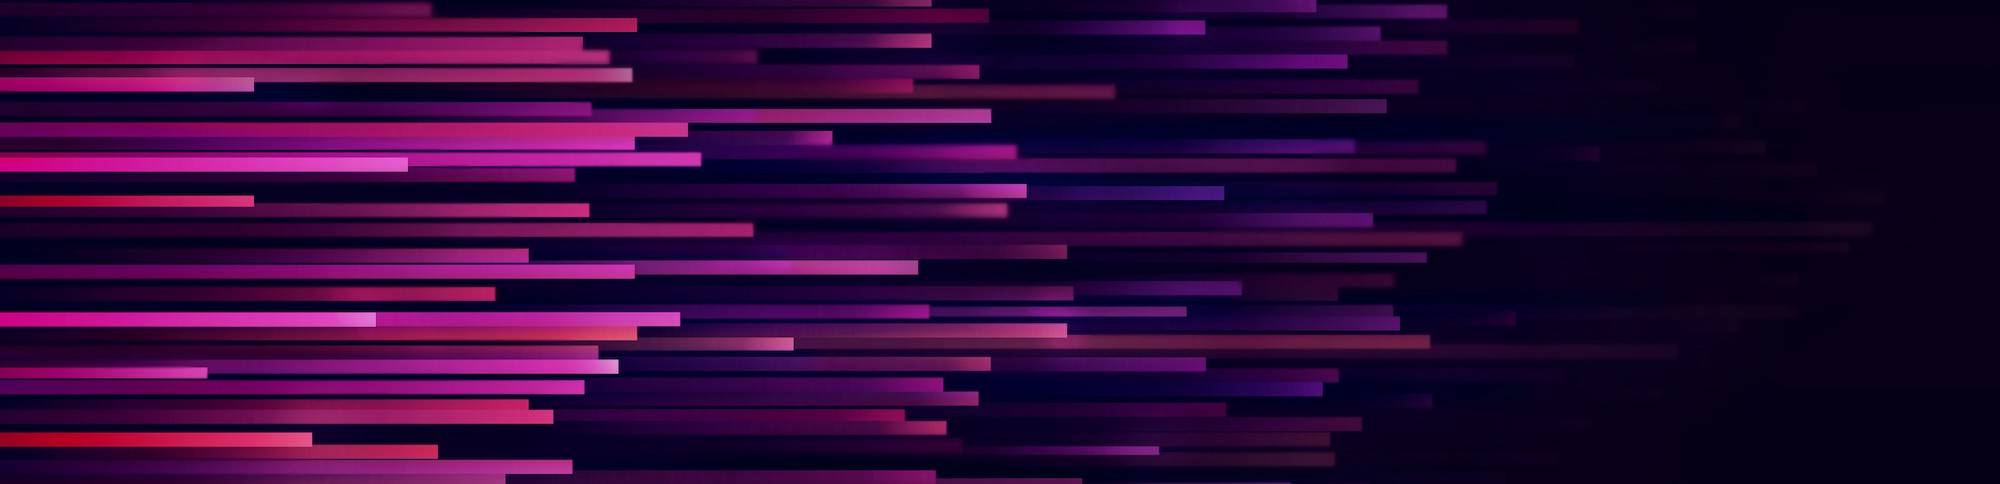 Speed lines technology Data connection abstract background. Network and futuristic concept. Energy Light and Digital stripes moving fast (Speed lines technology Data connection abstract background. Network and futuristic concept. Energy Light and Digi